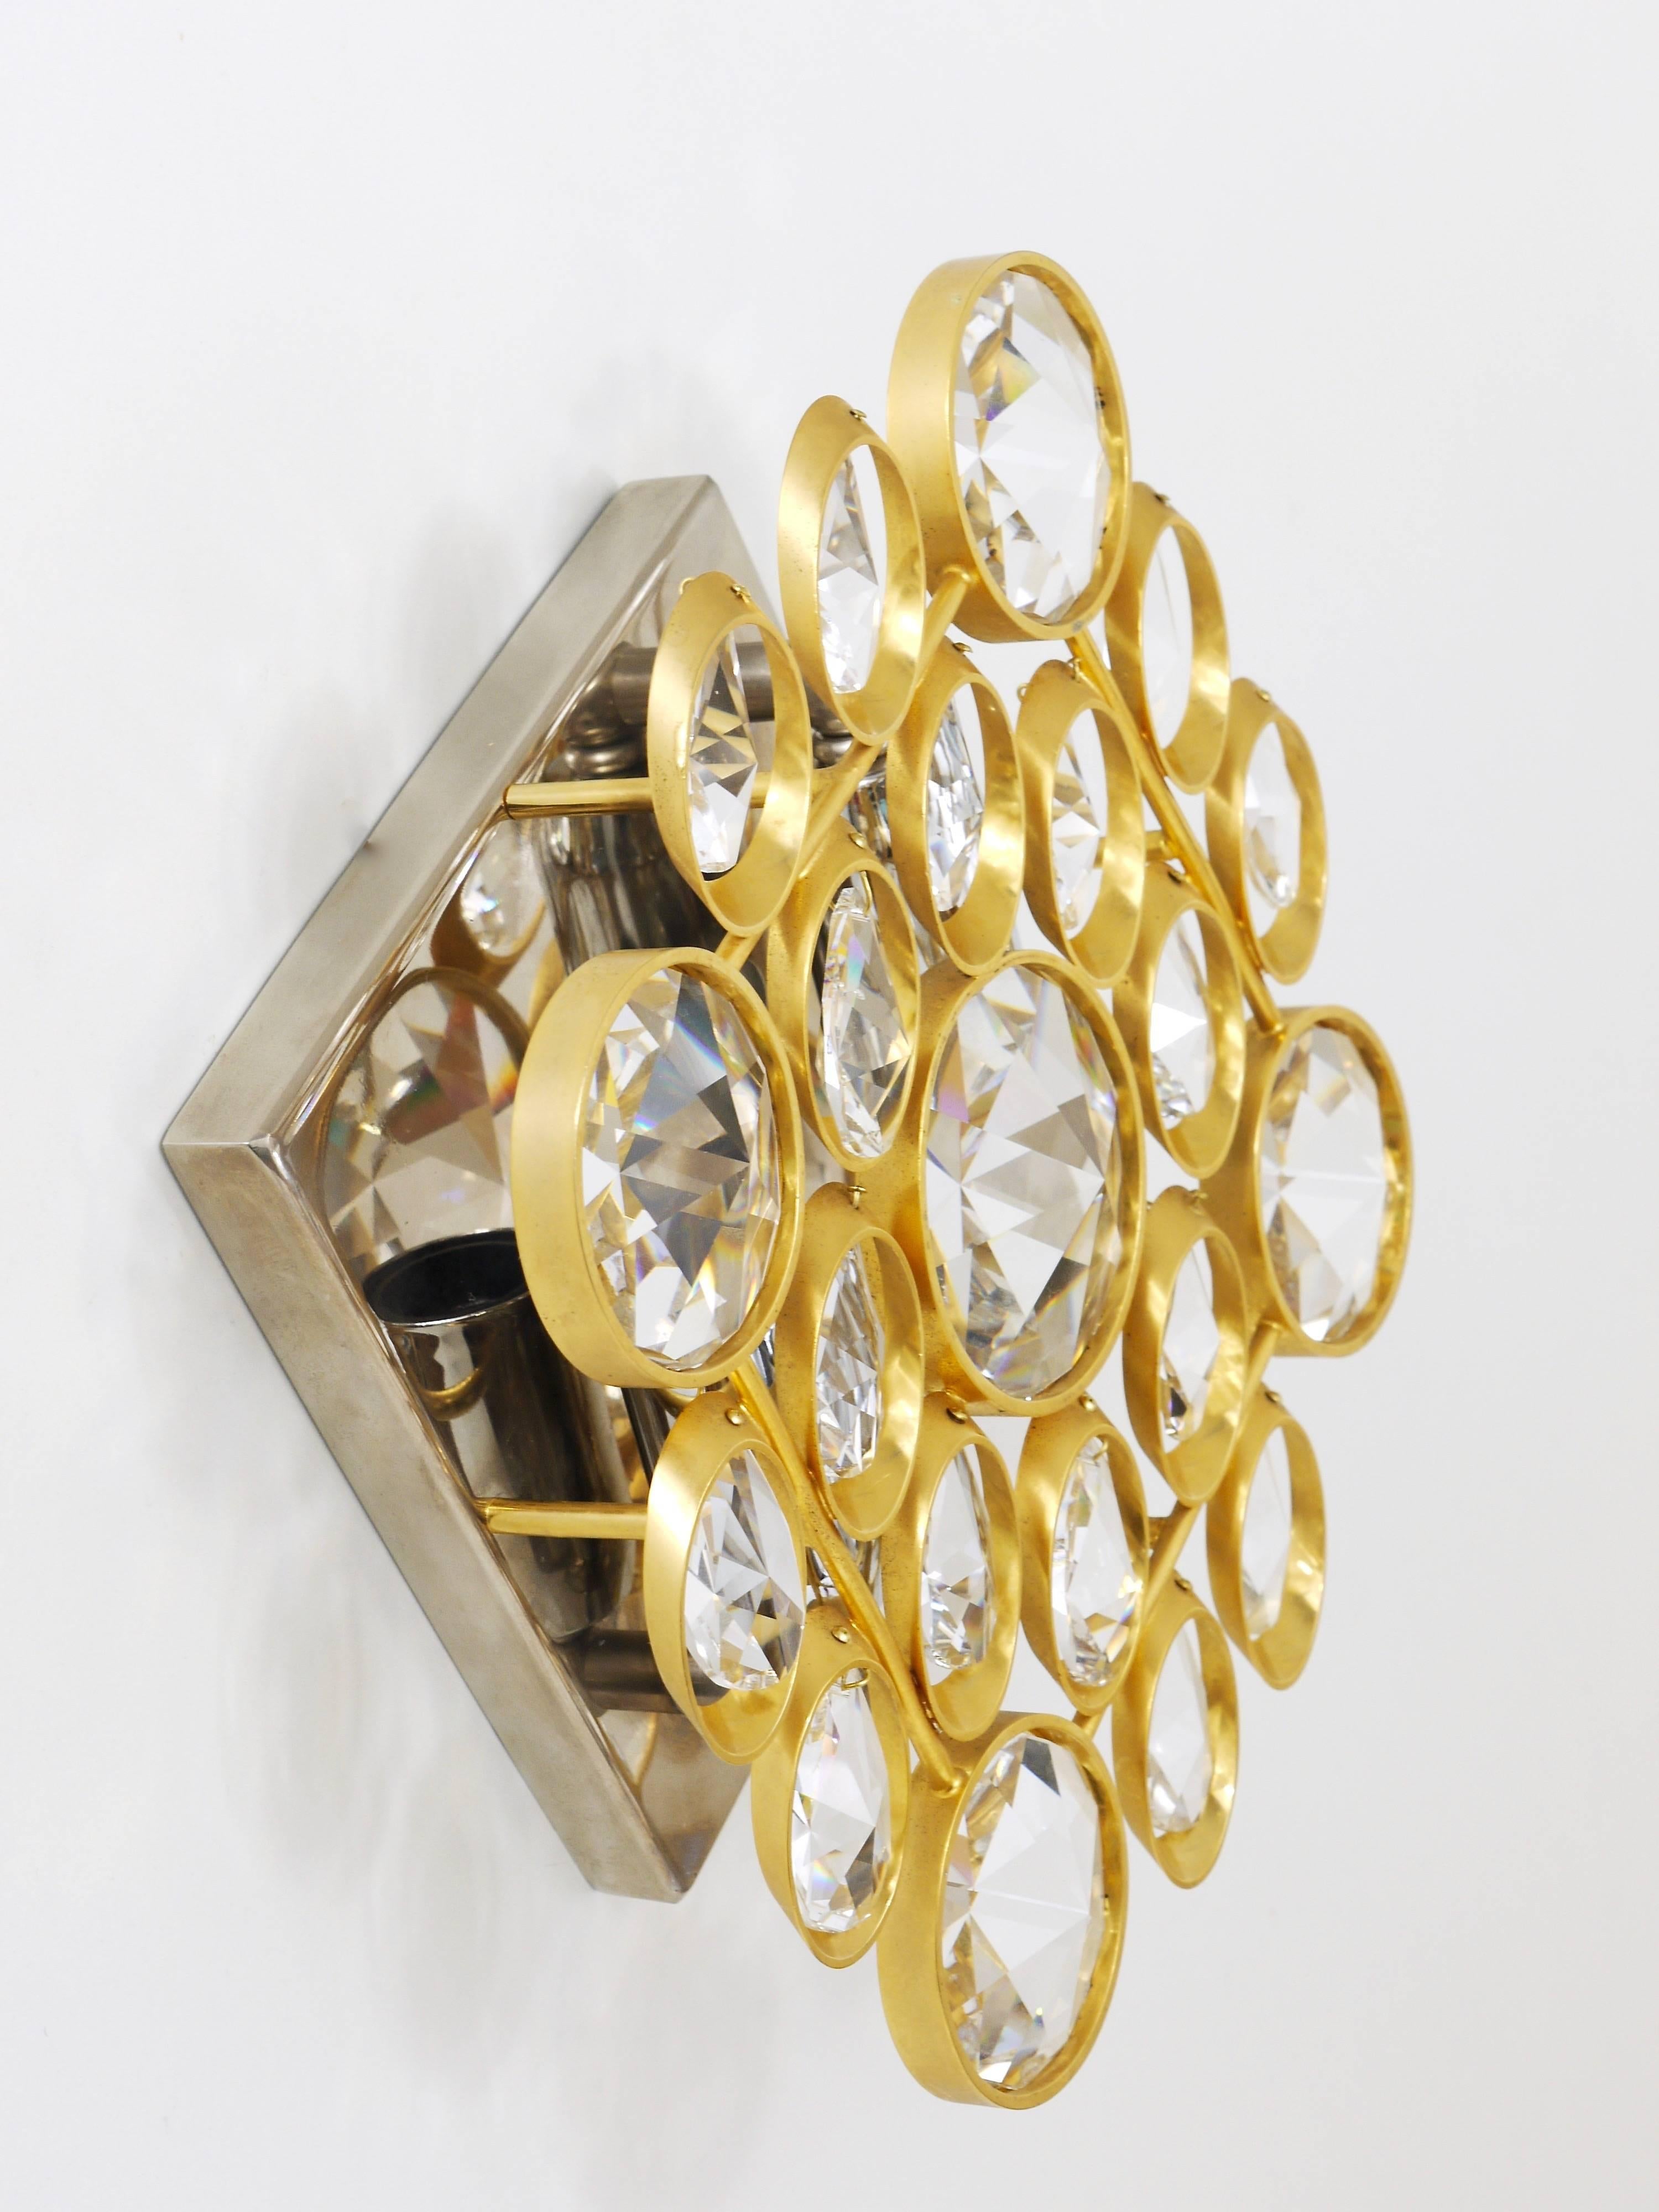 Ernst Palme Palwa Brass & Crystal Wall Lights / Sconces, Sciolari Style, 1970s For Sale 1